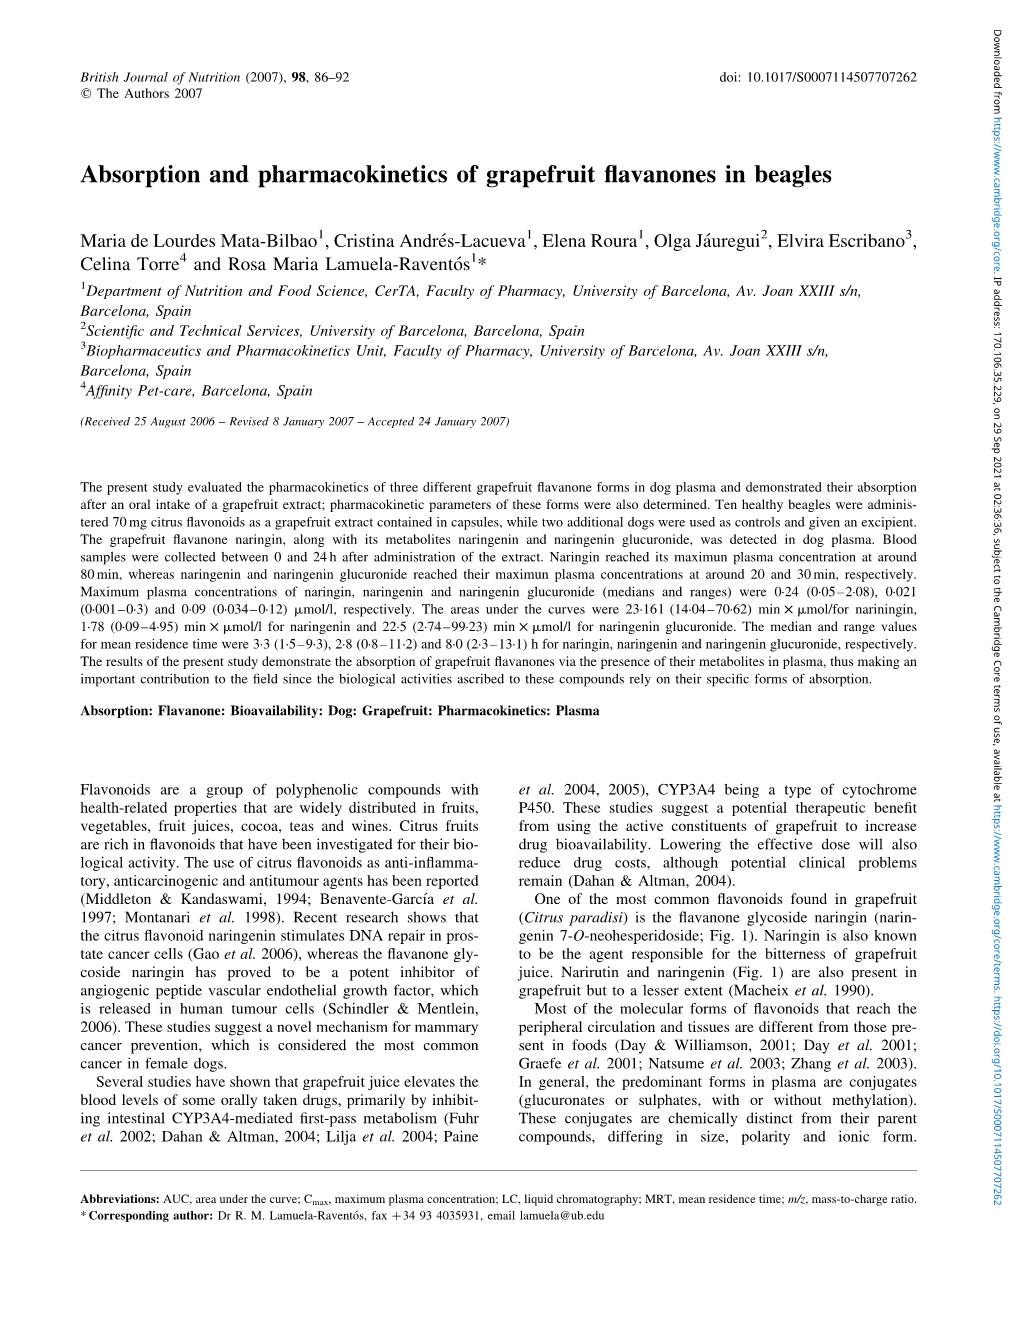 Absorption and Pharmacokinetics of Grapefruit Flavanones in Beagles